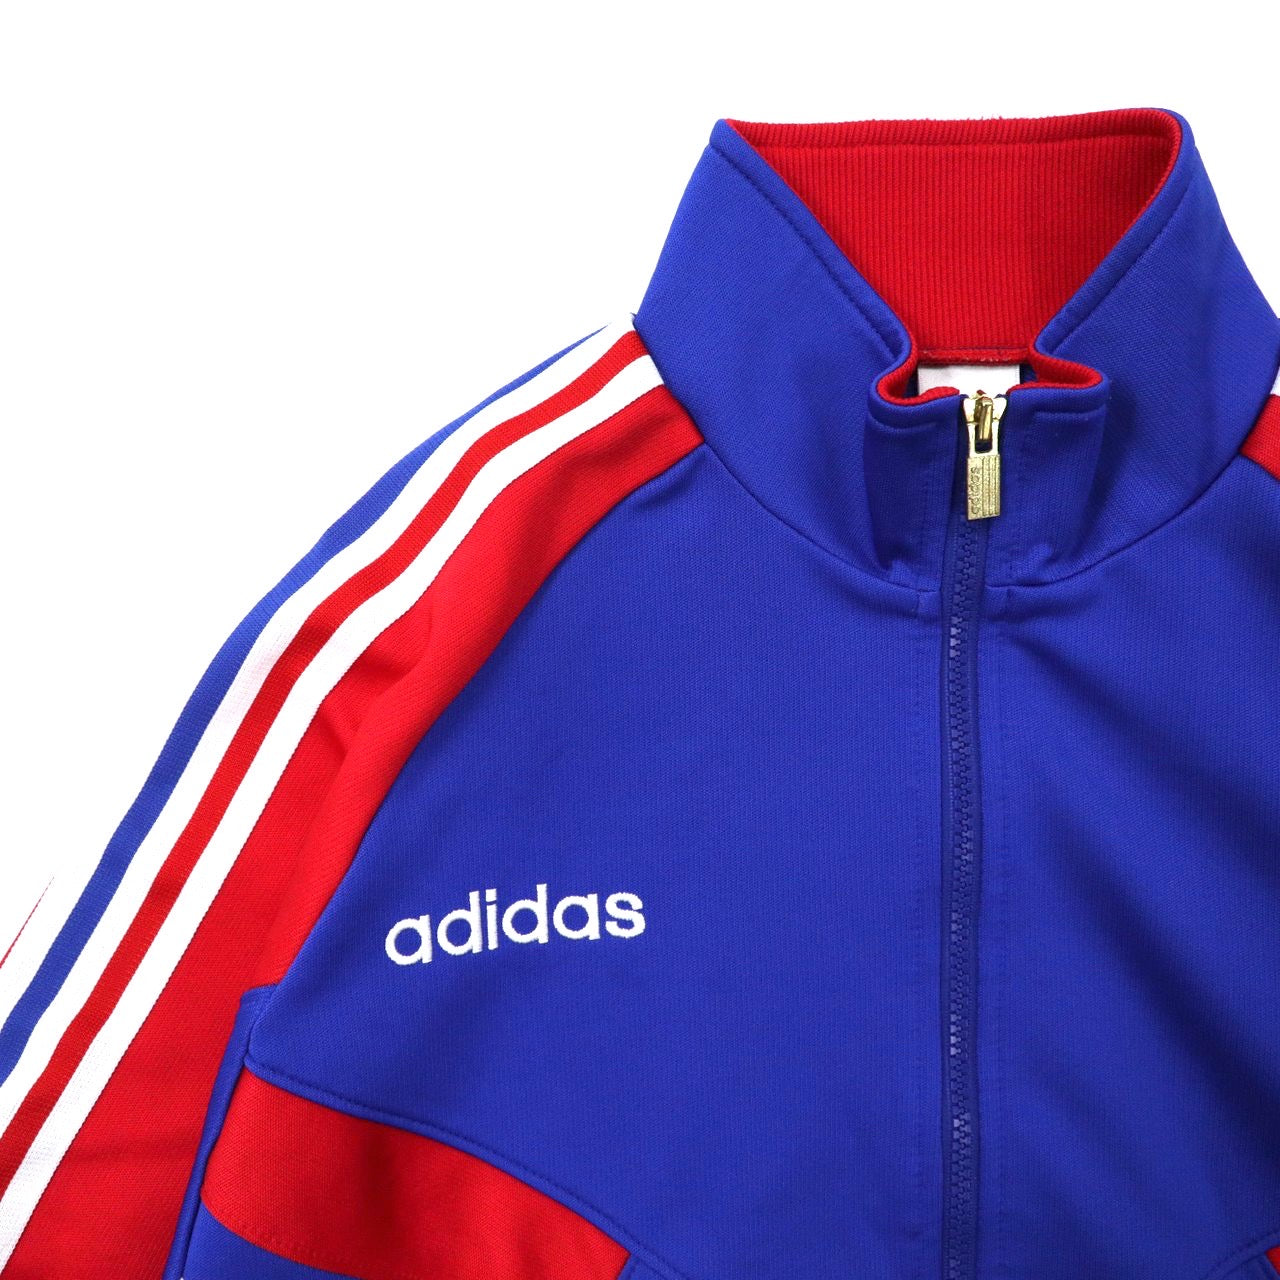 Adidas Track Jacket L Blue Tricolor Polyester Logo Embroidery 3